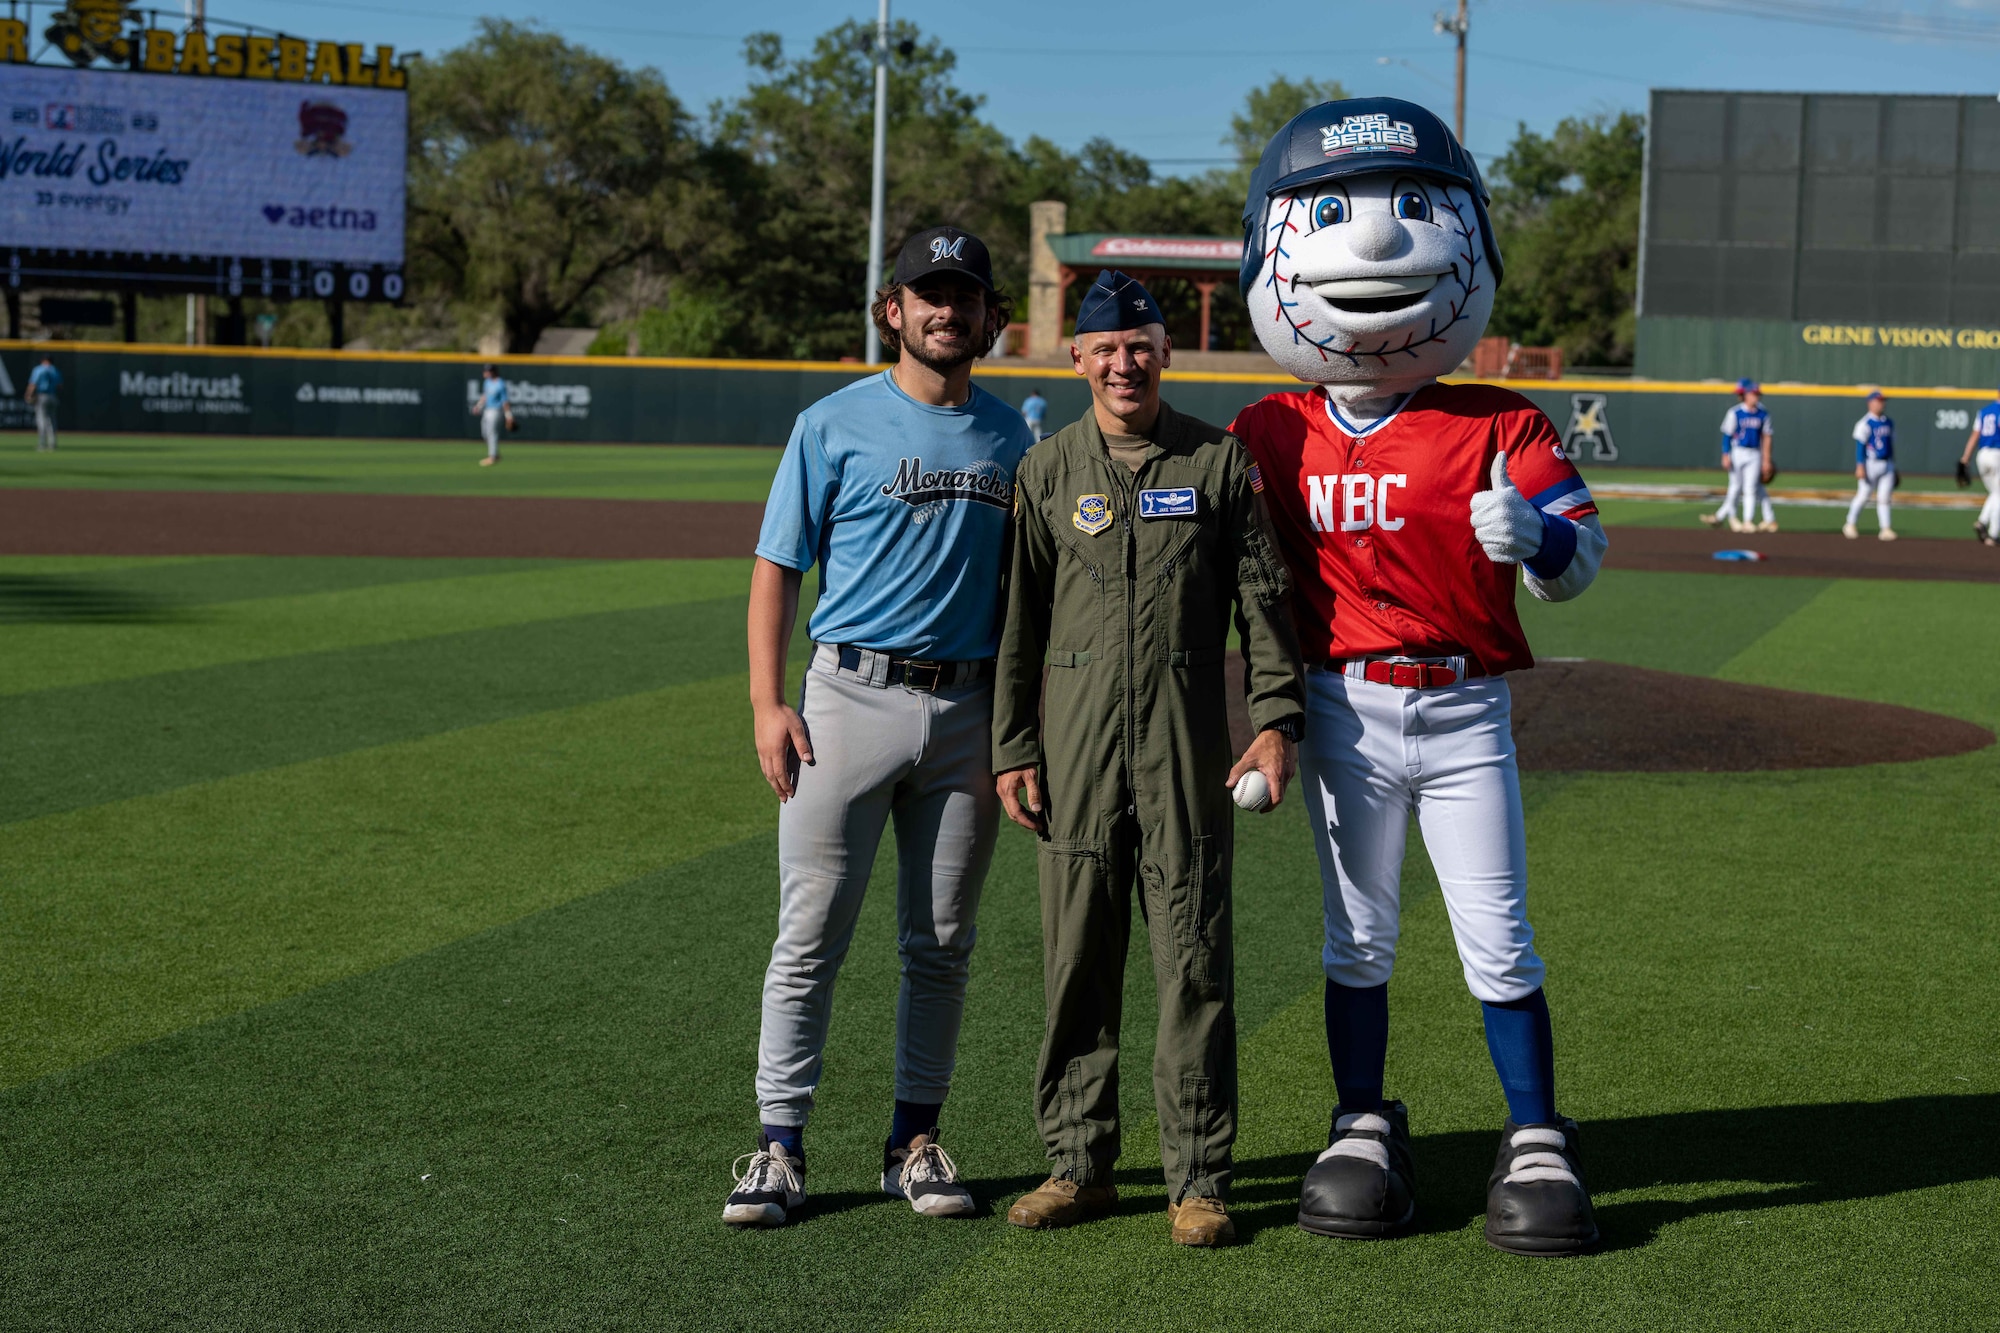 Col. Jacob Thornburg, 22nd Air Refueling Wing deputy commander, poses for a photo with a player from the Hutchison Monarchs at the NBC World Series baseball game at Eck Stadium in Wichita, Kansas, August 4, 2023. The Hutchinson Monarchs rallied from a 4-0 deficit and beat the Hays Larks 6-4 in 11 innings in the pool play opener. (U.S. Air Force photo by Airman 1st Class William Lunn)